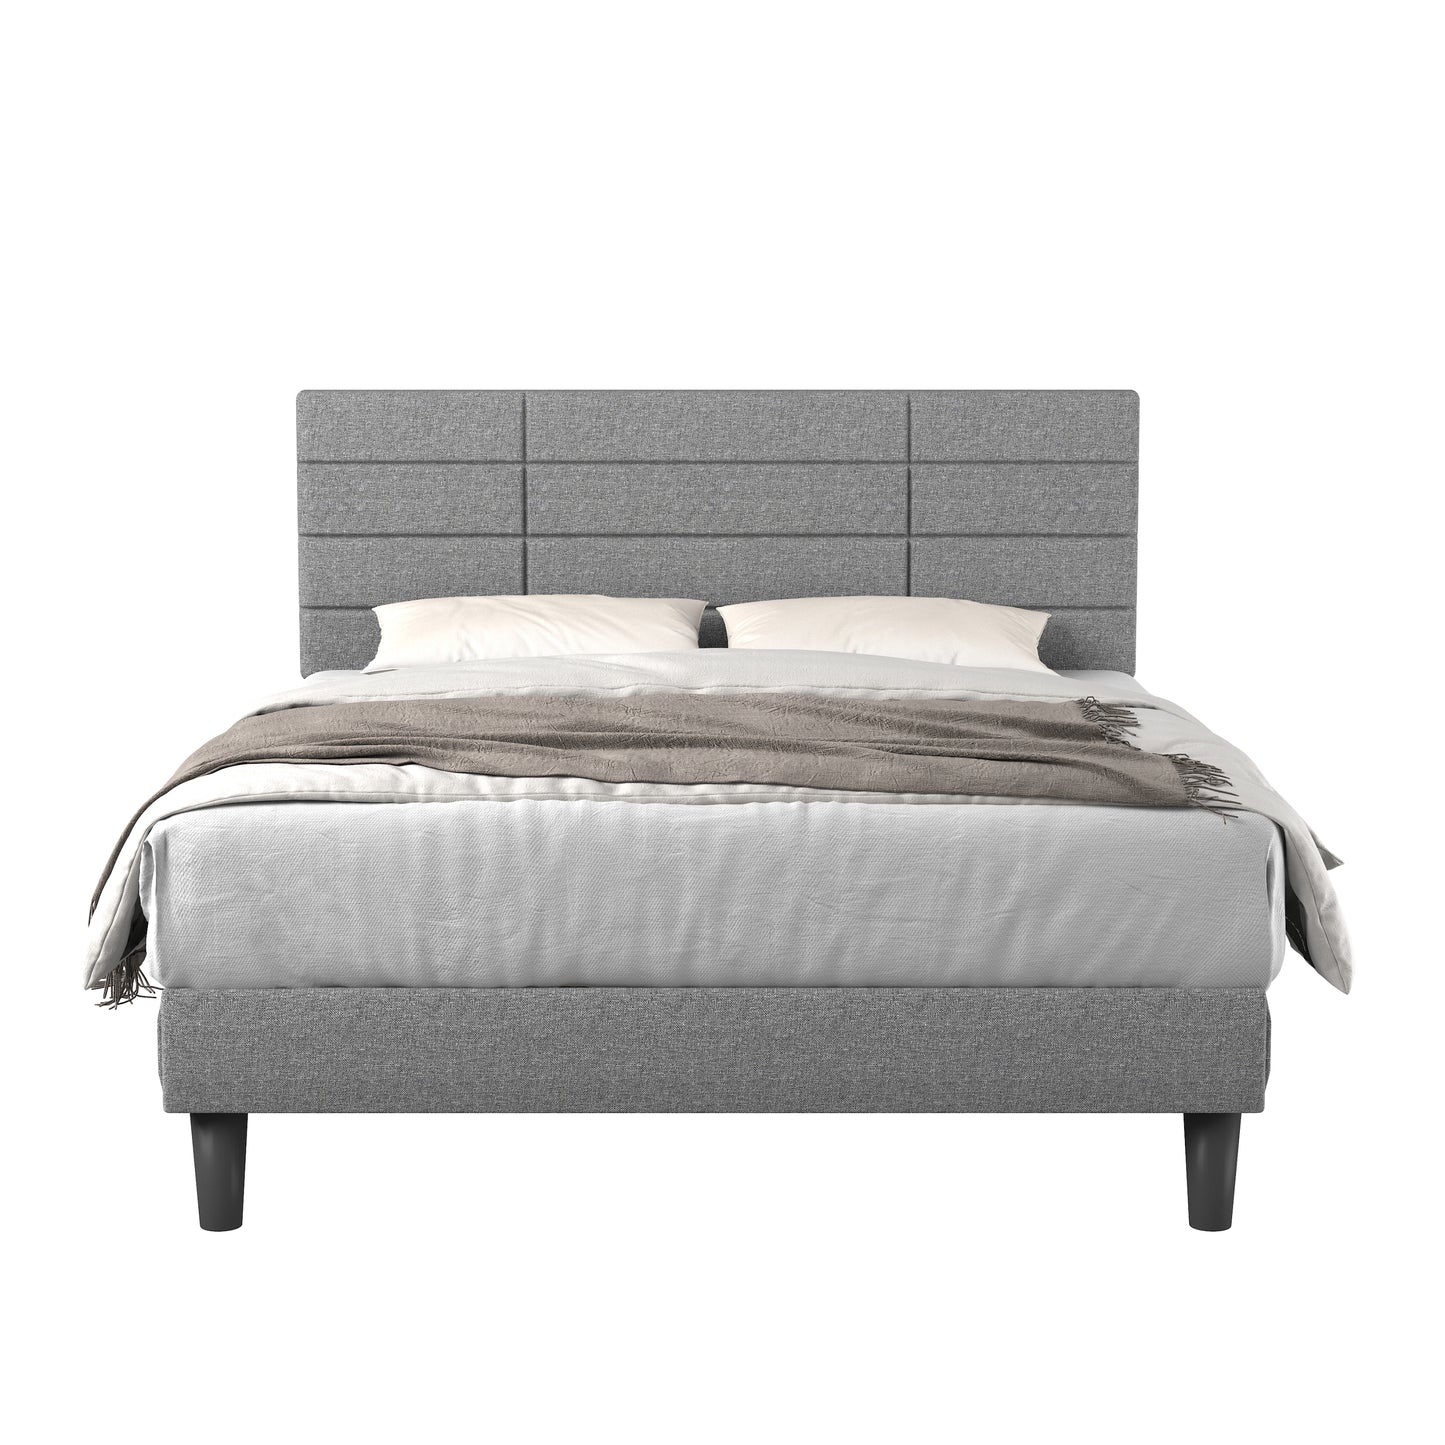 Molblly Full Size Platform Bed Frame with Upholstered Headboard, Strong Frame, and Wooden Slats Support, Non-Slip and Noise-Free, No Box Spring Needed, Easy Assembly, Light Grey